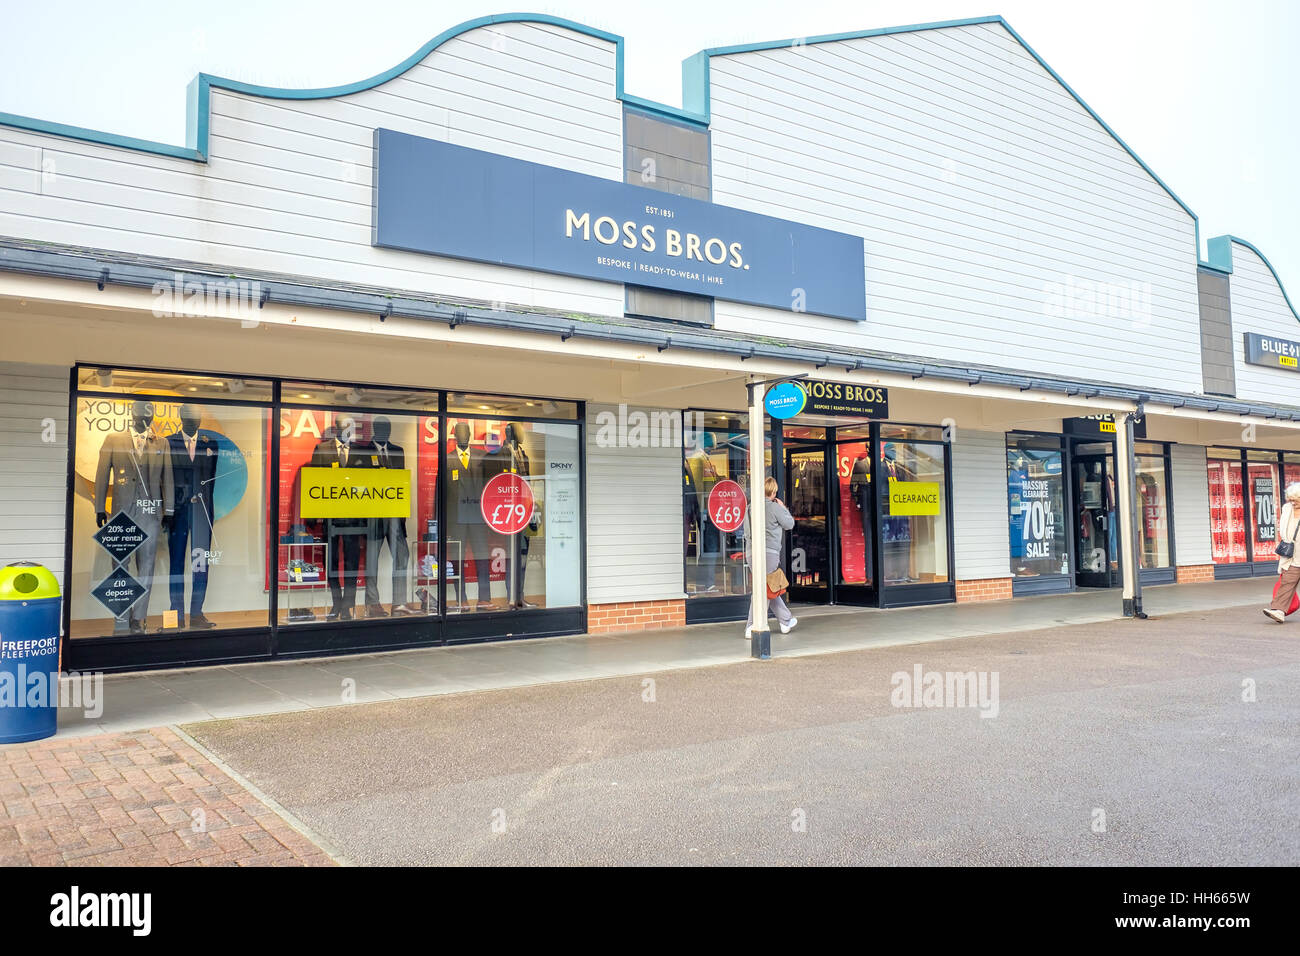 Moss Bros Shop Freeport shopping Outlet Stock Photo